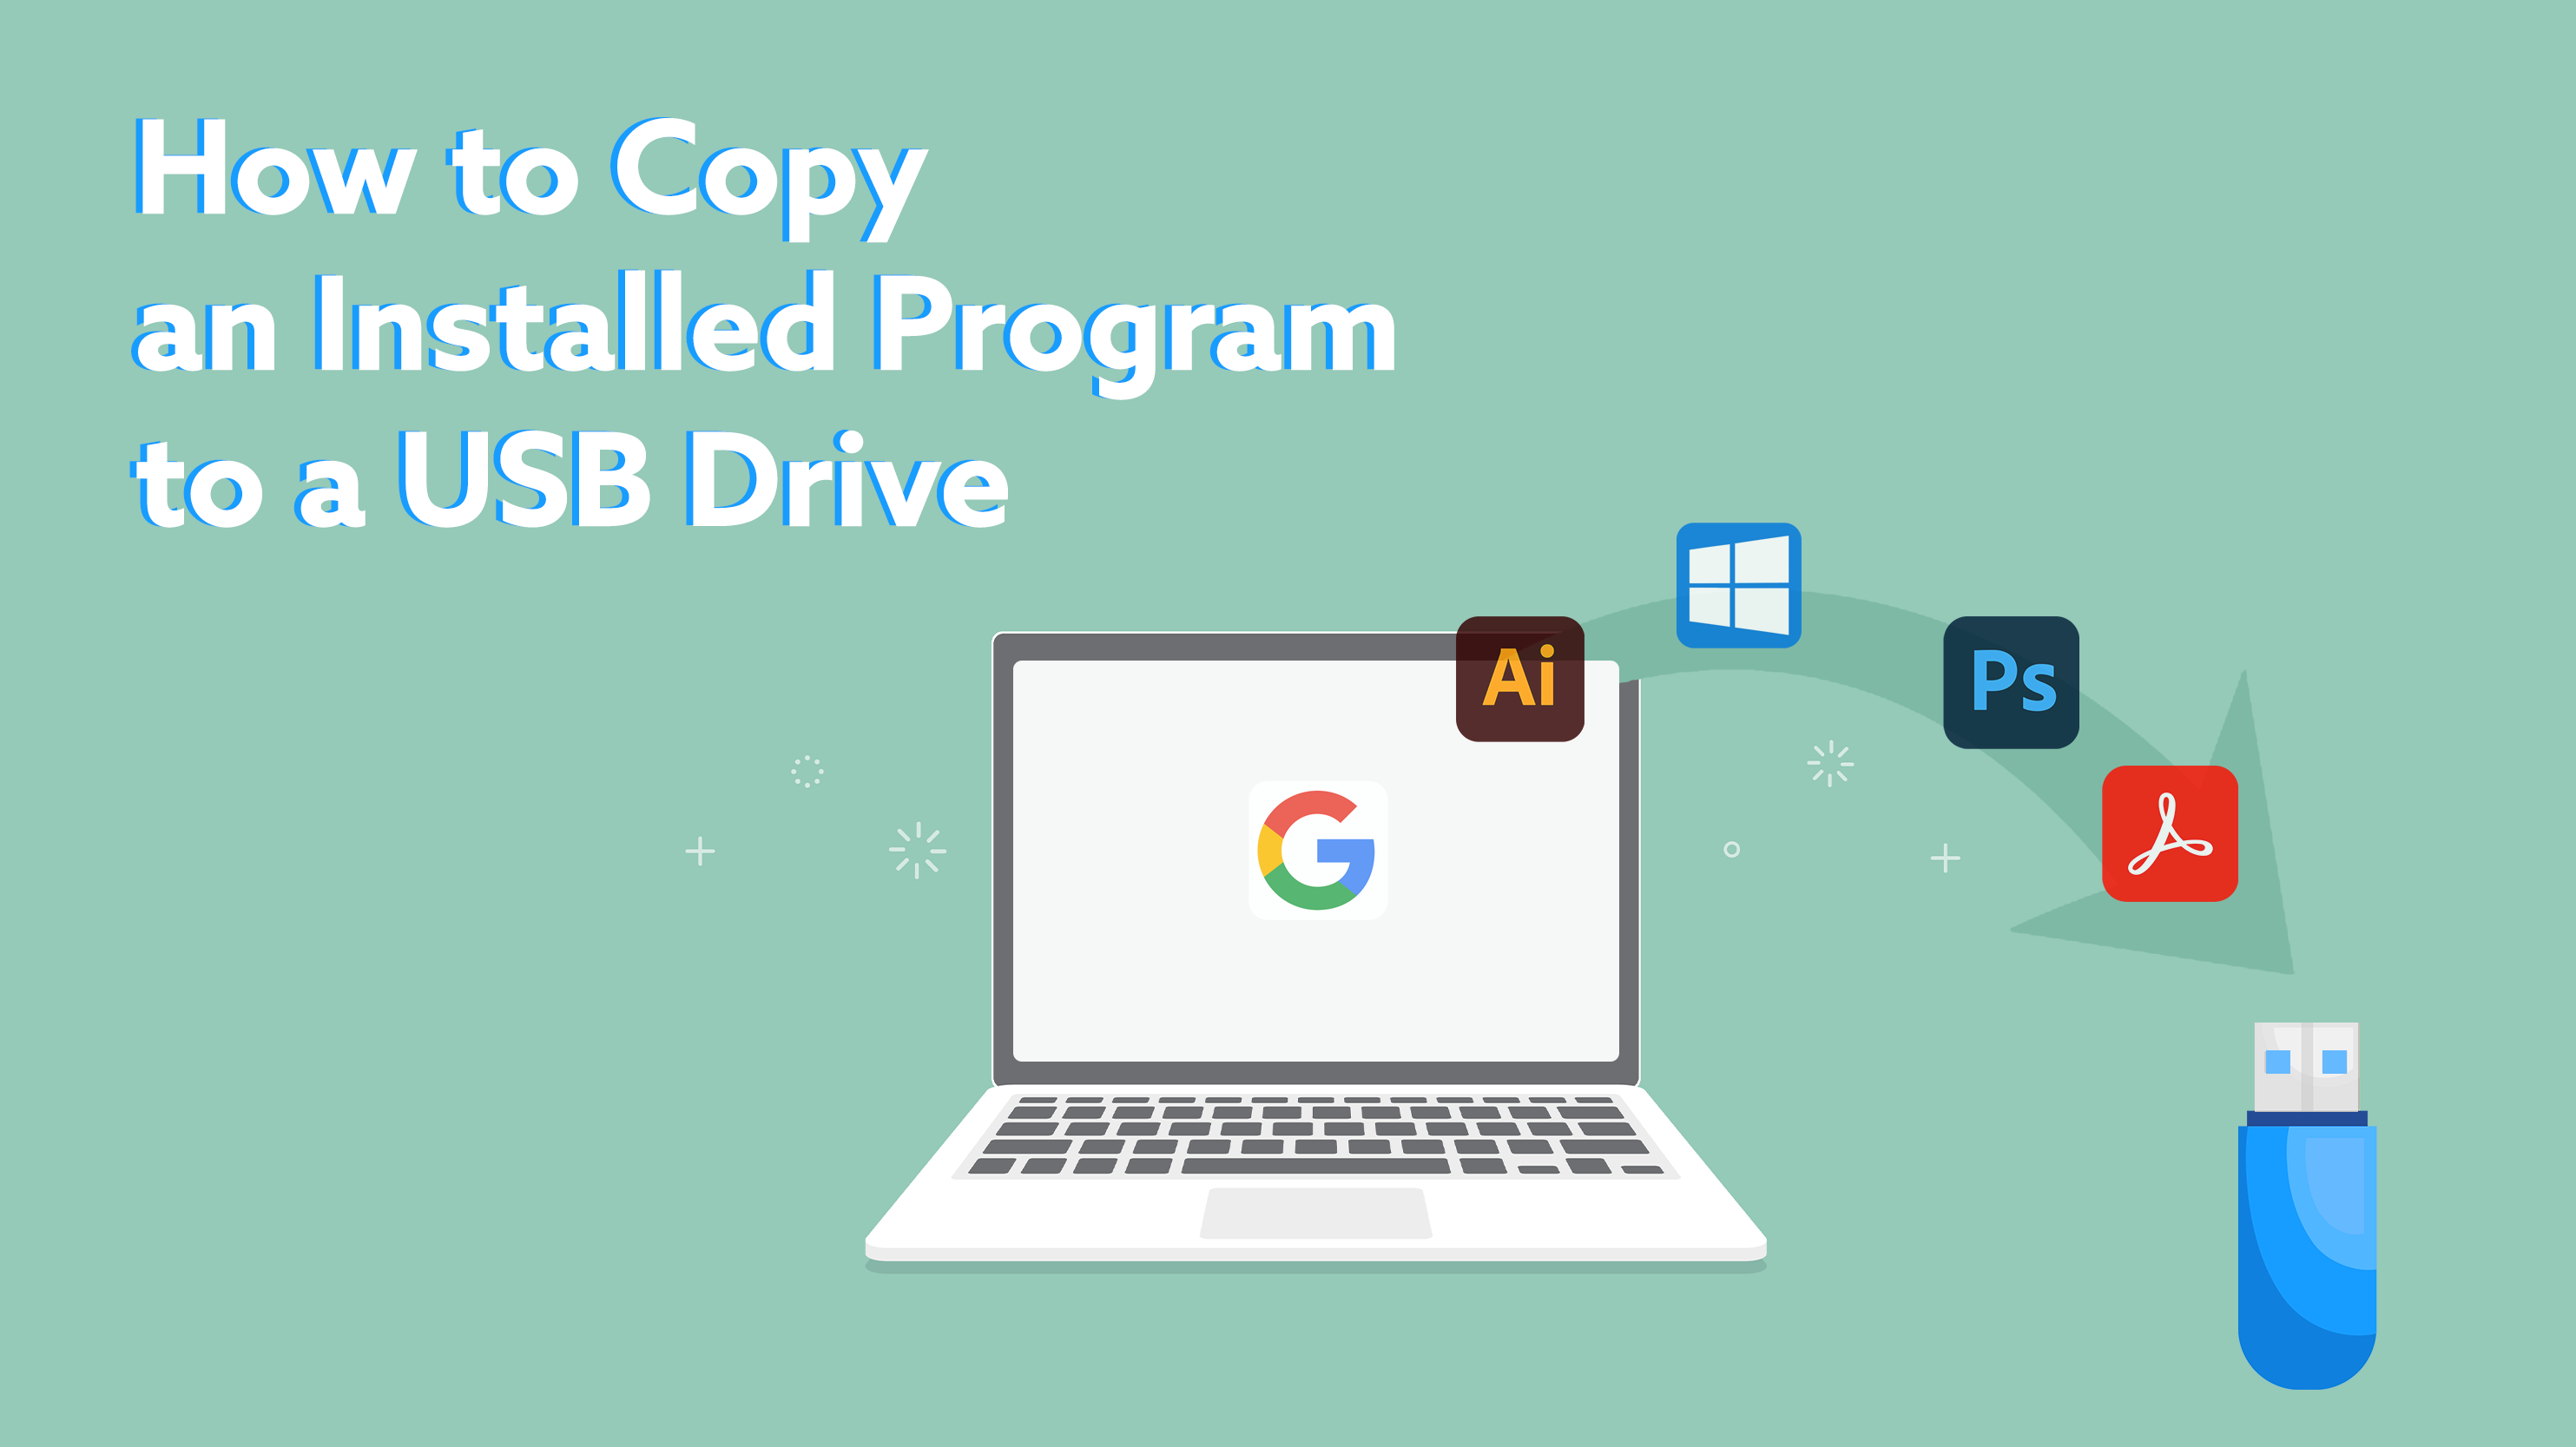 Copy an Installed Program to a USB